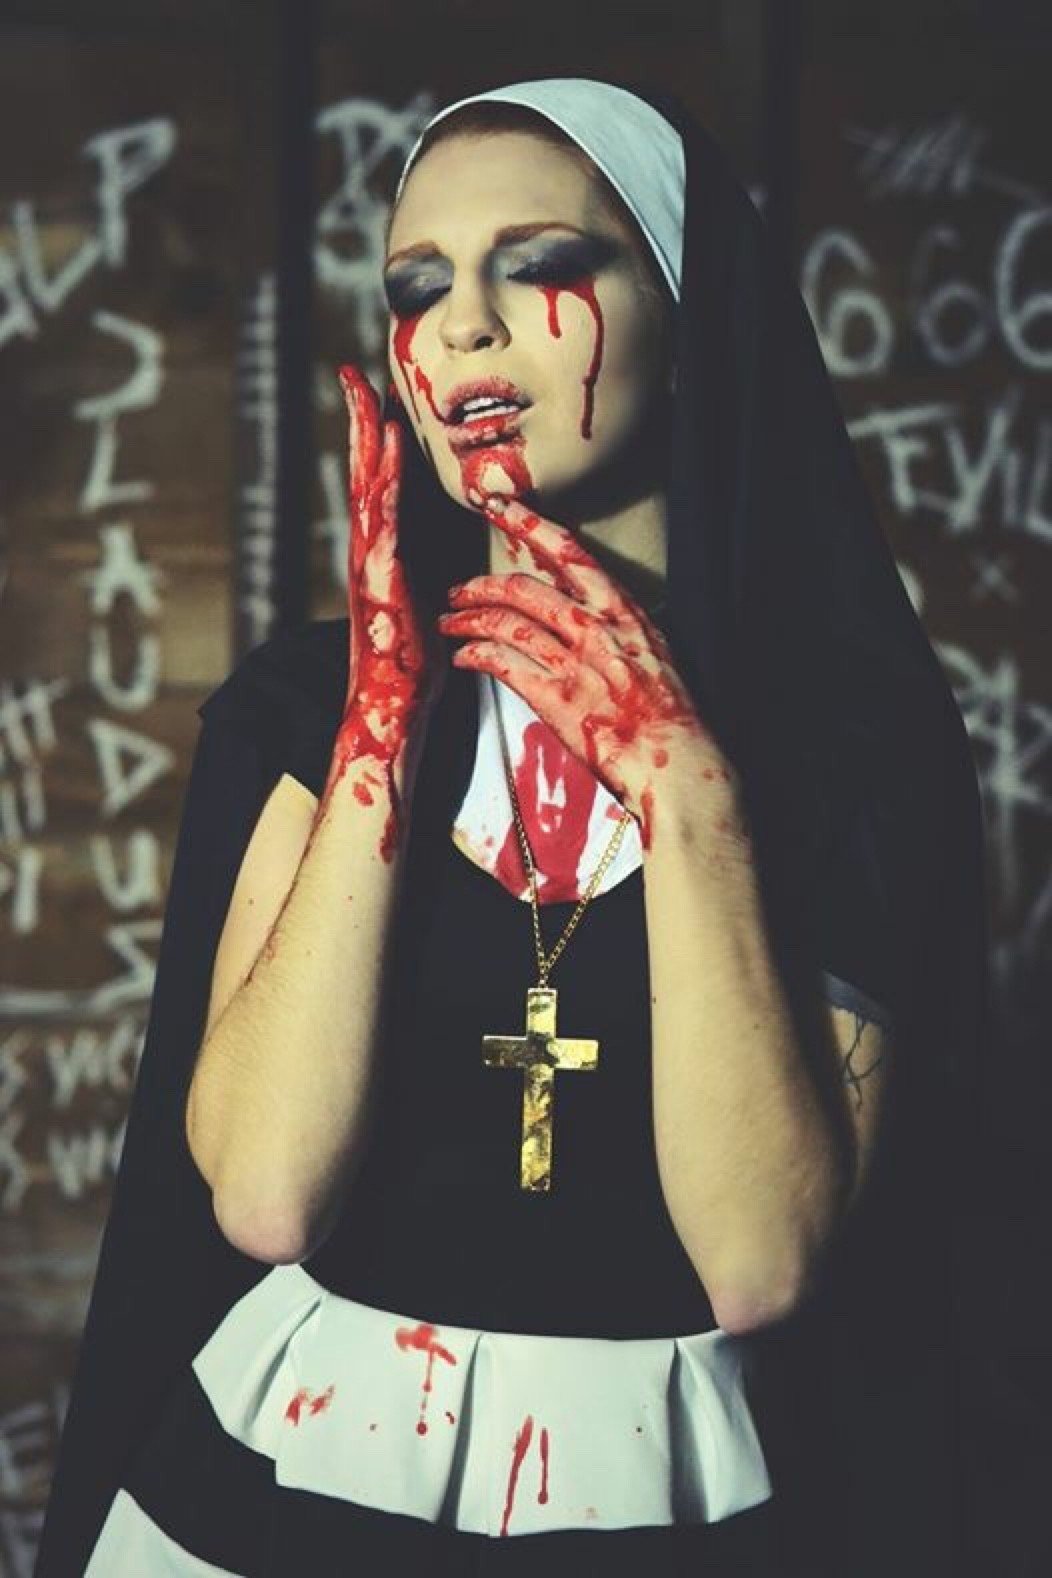 Photo by Schadenfreude with the username @Schadenfreude,  November 23, 2015 at 1:50 AM and the text says 'hjsteele:

Model @hjsteele
Photography by AP Skyline #nun  #blood  #macabre  #nsfw  #multi  #pic  #prayer'